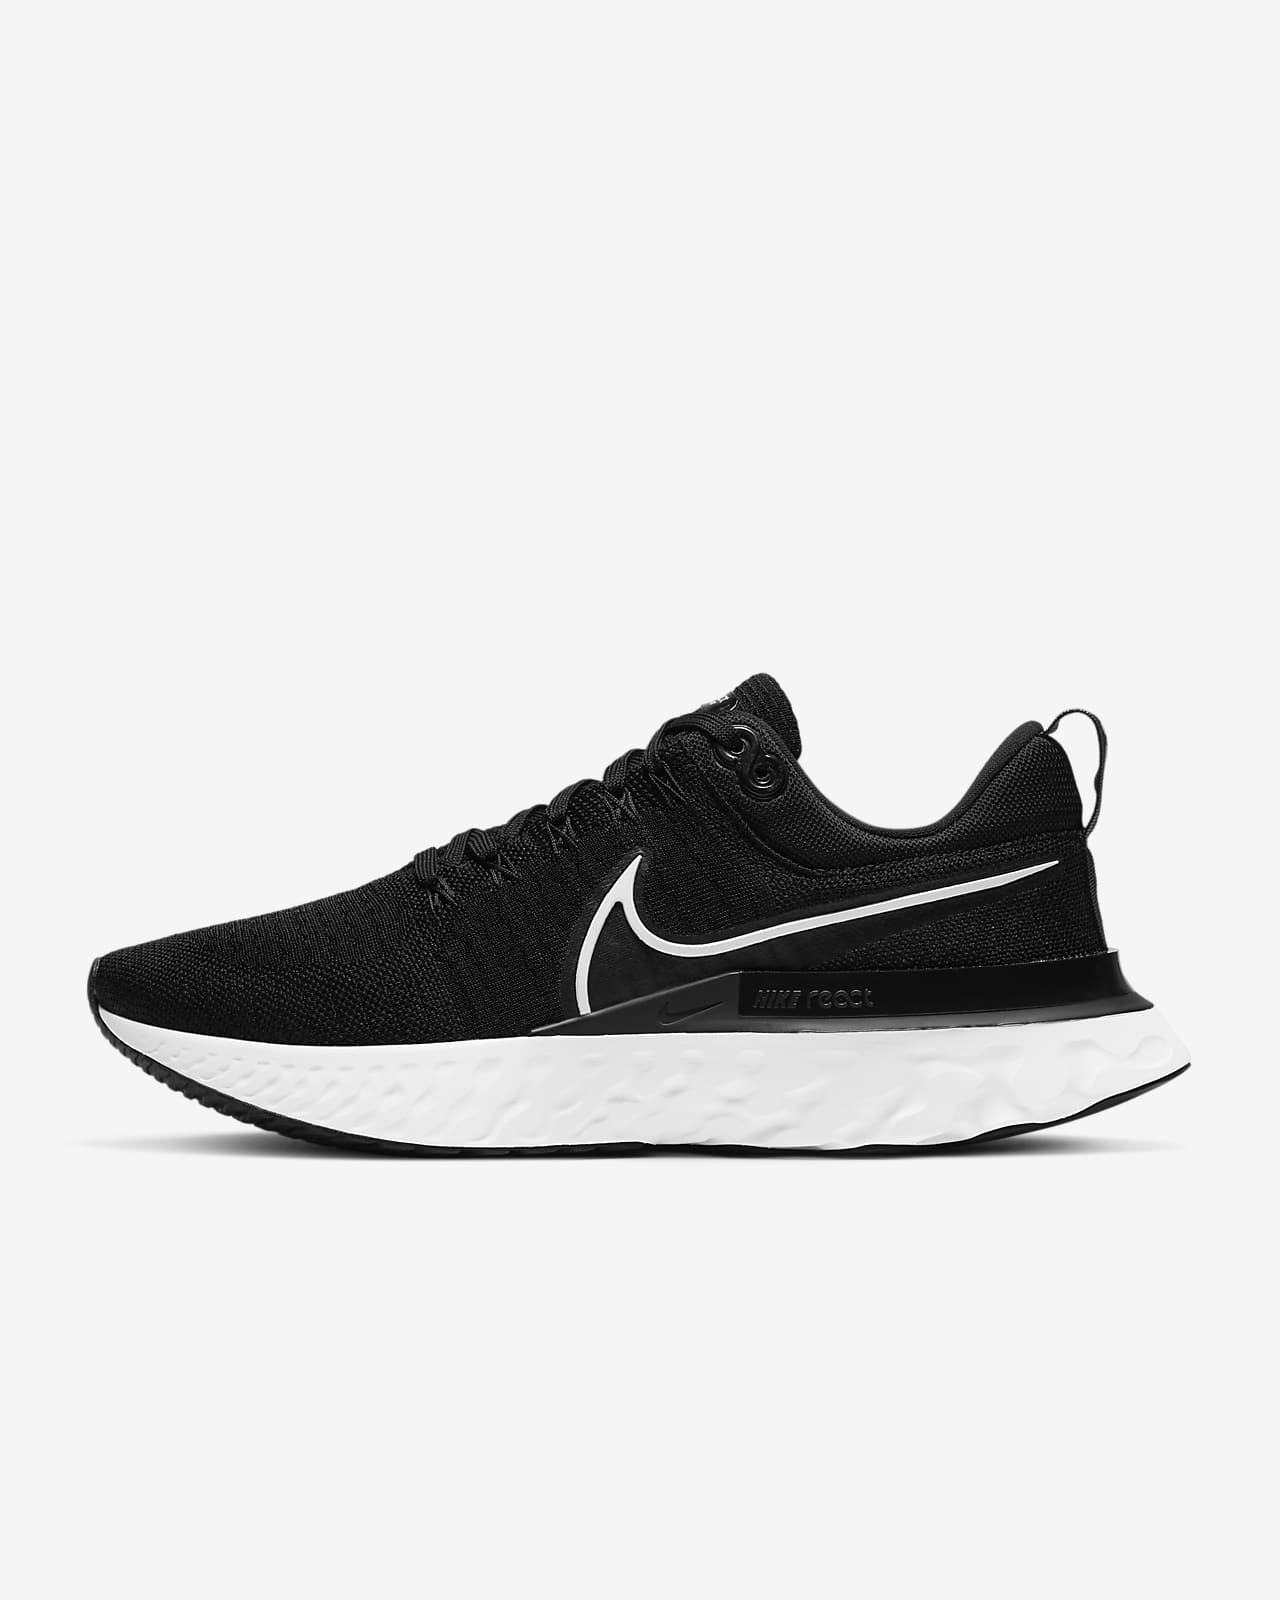 Chaussure de running sur route Nike React Infinity Run Flyknit 2 pour Homme